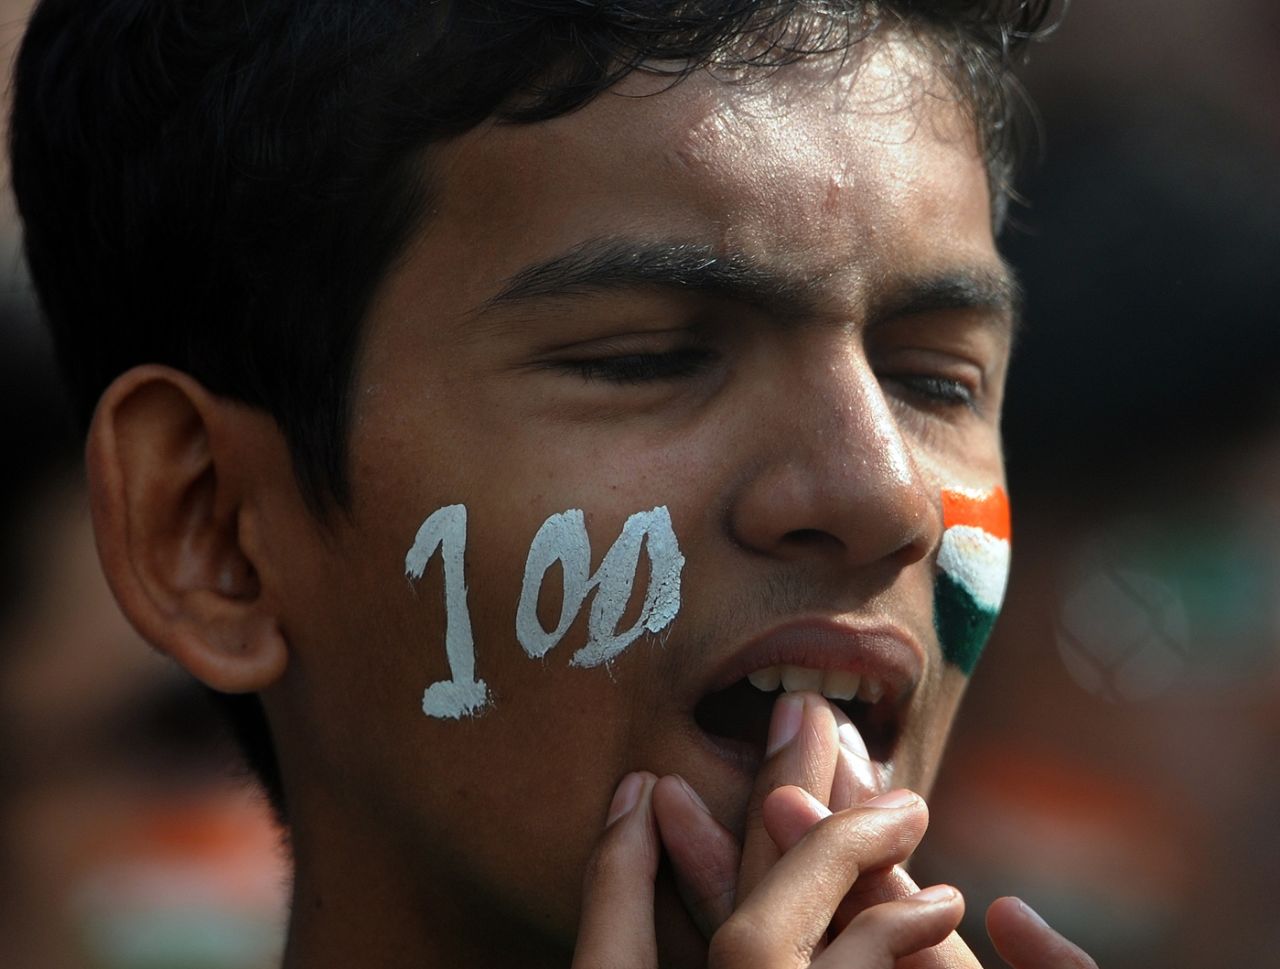 A young fan is disappointed after Sachin Tendulkar misses getting his 100th international century, India v West Indies, 3rd Test, Mumbai, 4th day, November 25, 2011